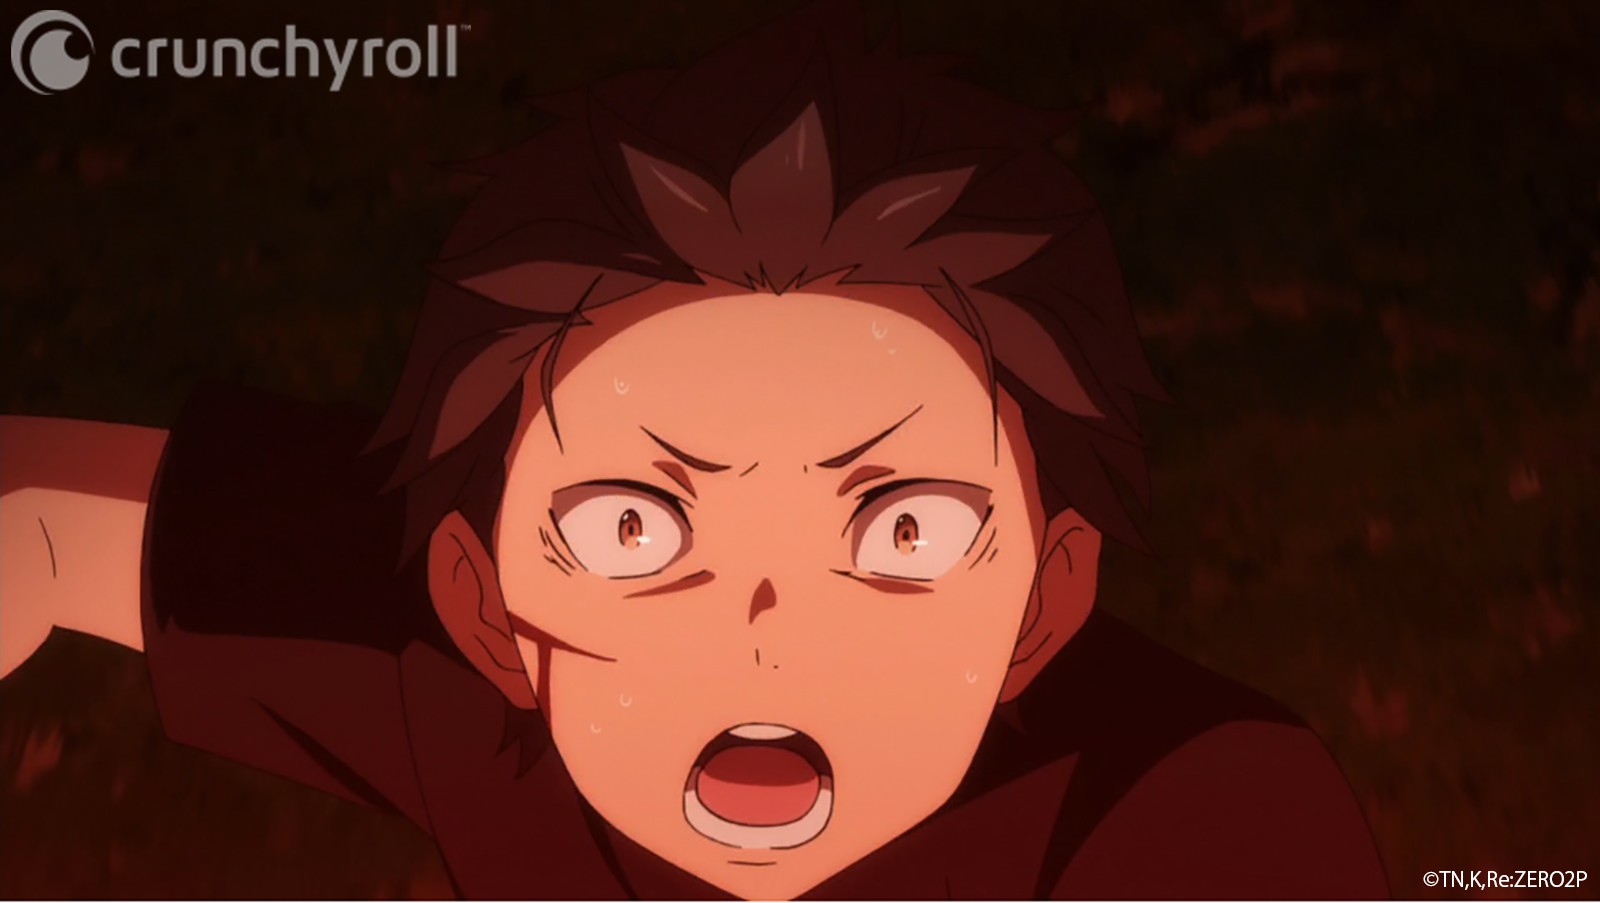 Natsuki Subaru attempts to flee from a murderous Rem in a scene from the Re: ZERO -Starting Life in Another World- TV anime.